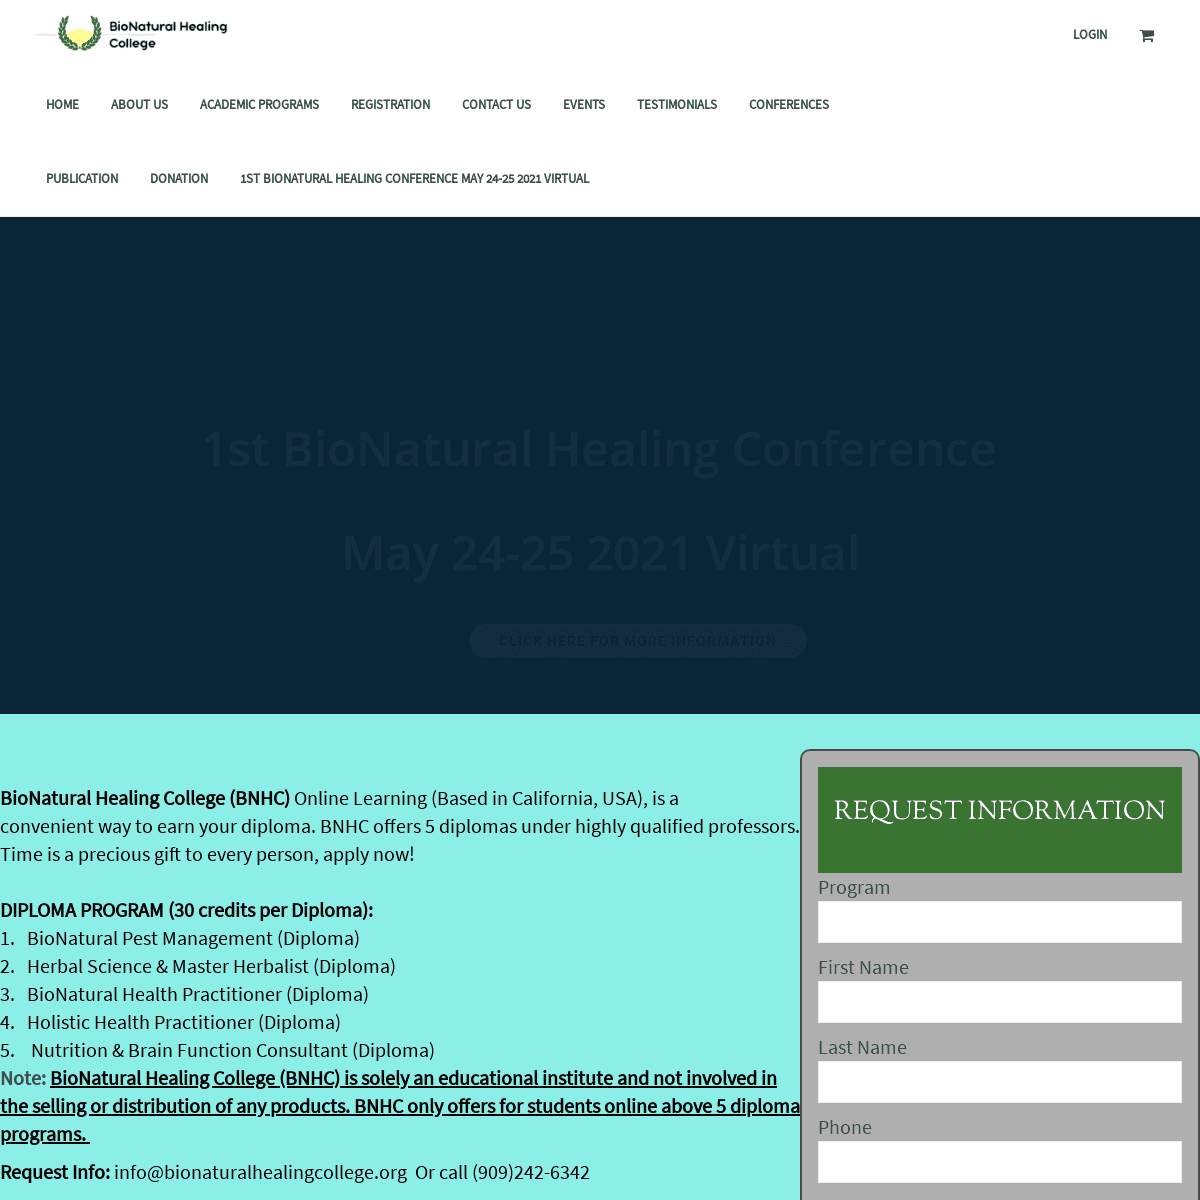 A complete backup of https://bionaturalhealingcollege.org